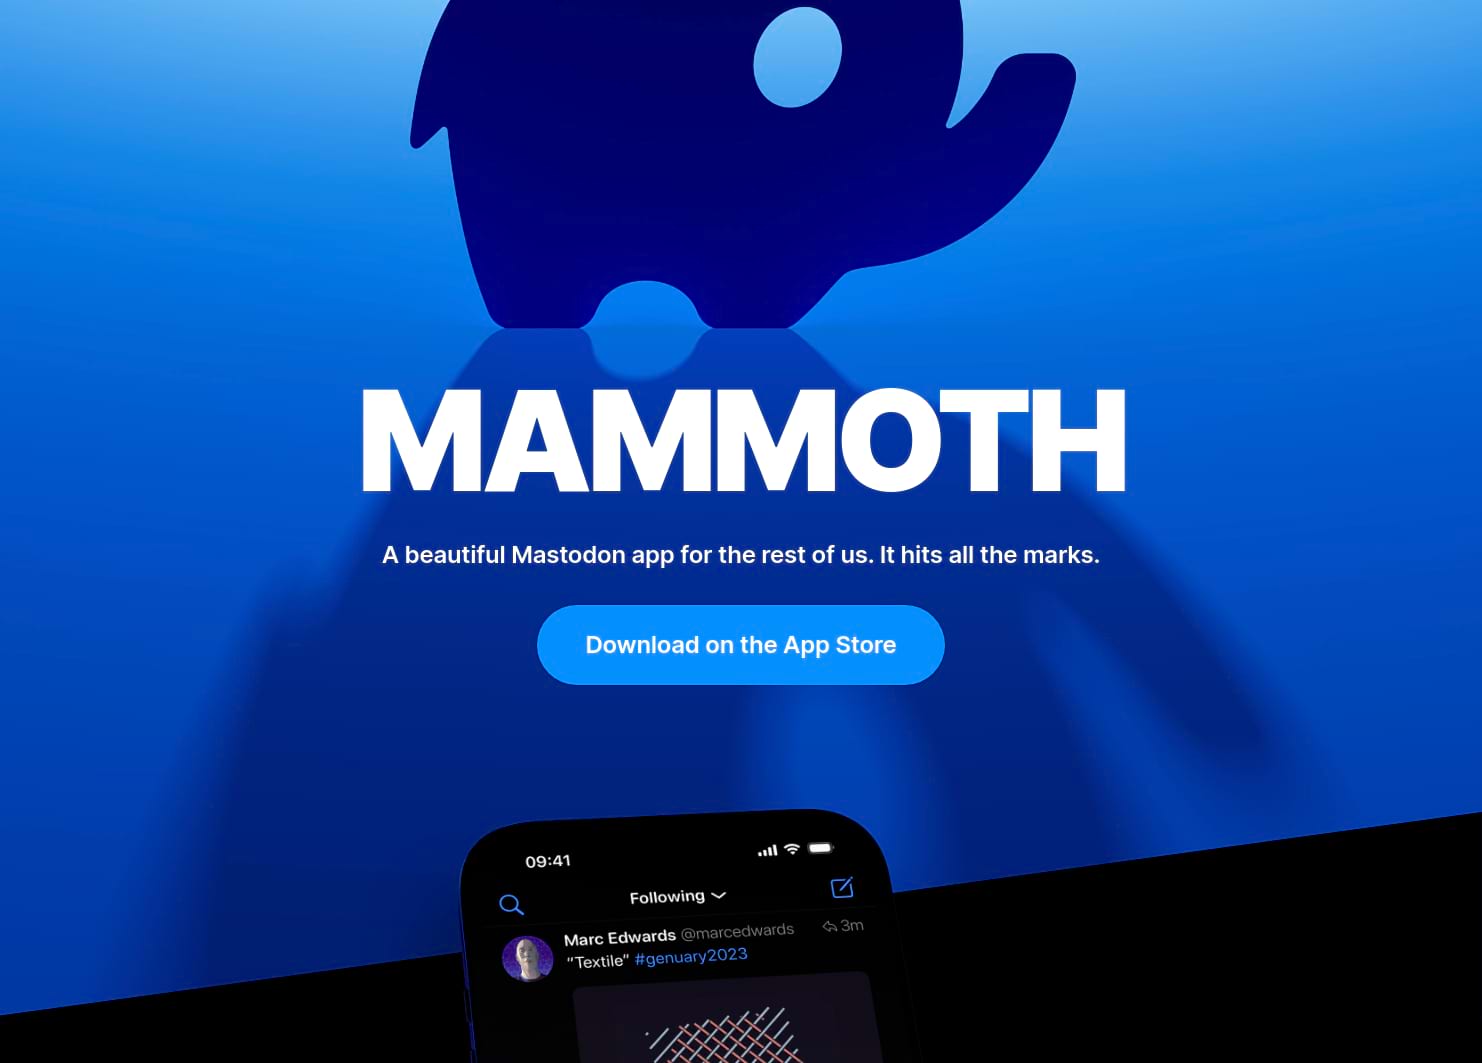 MAMMOTH - A beautiful Mastodon app for the rest of us. It hits all the marks. Button: Download on the App Store